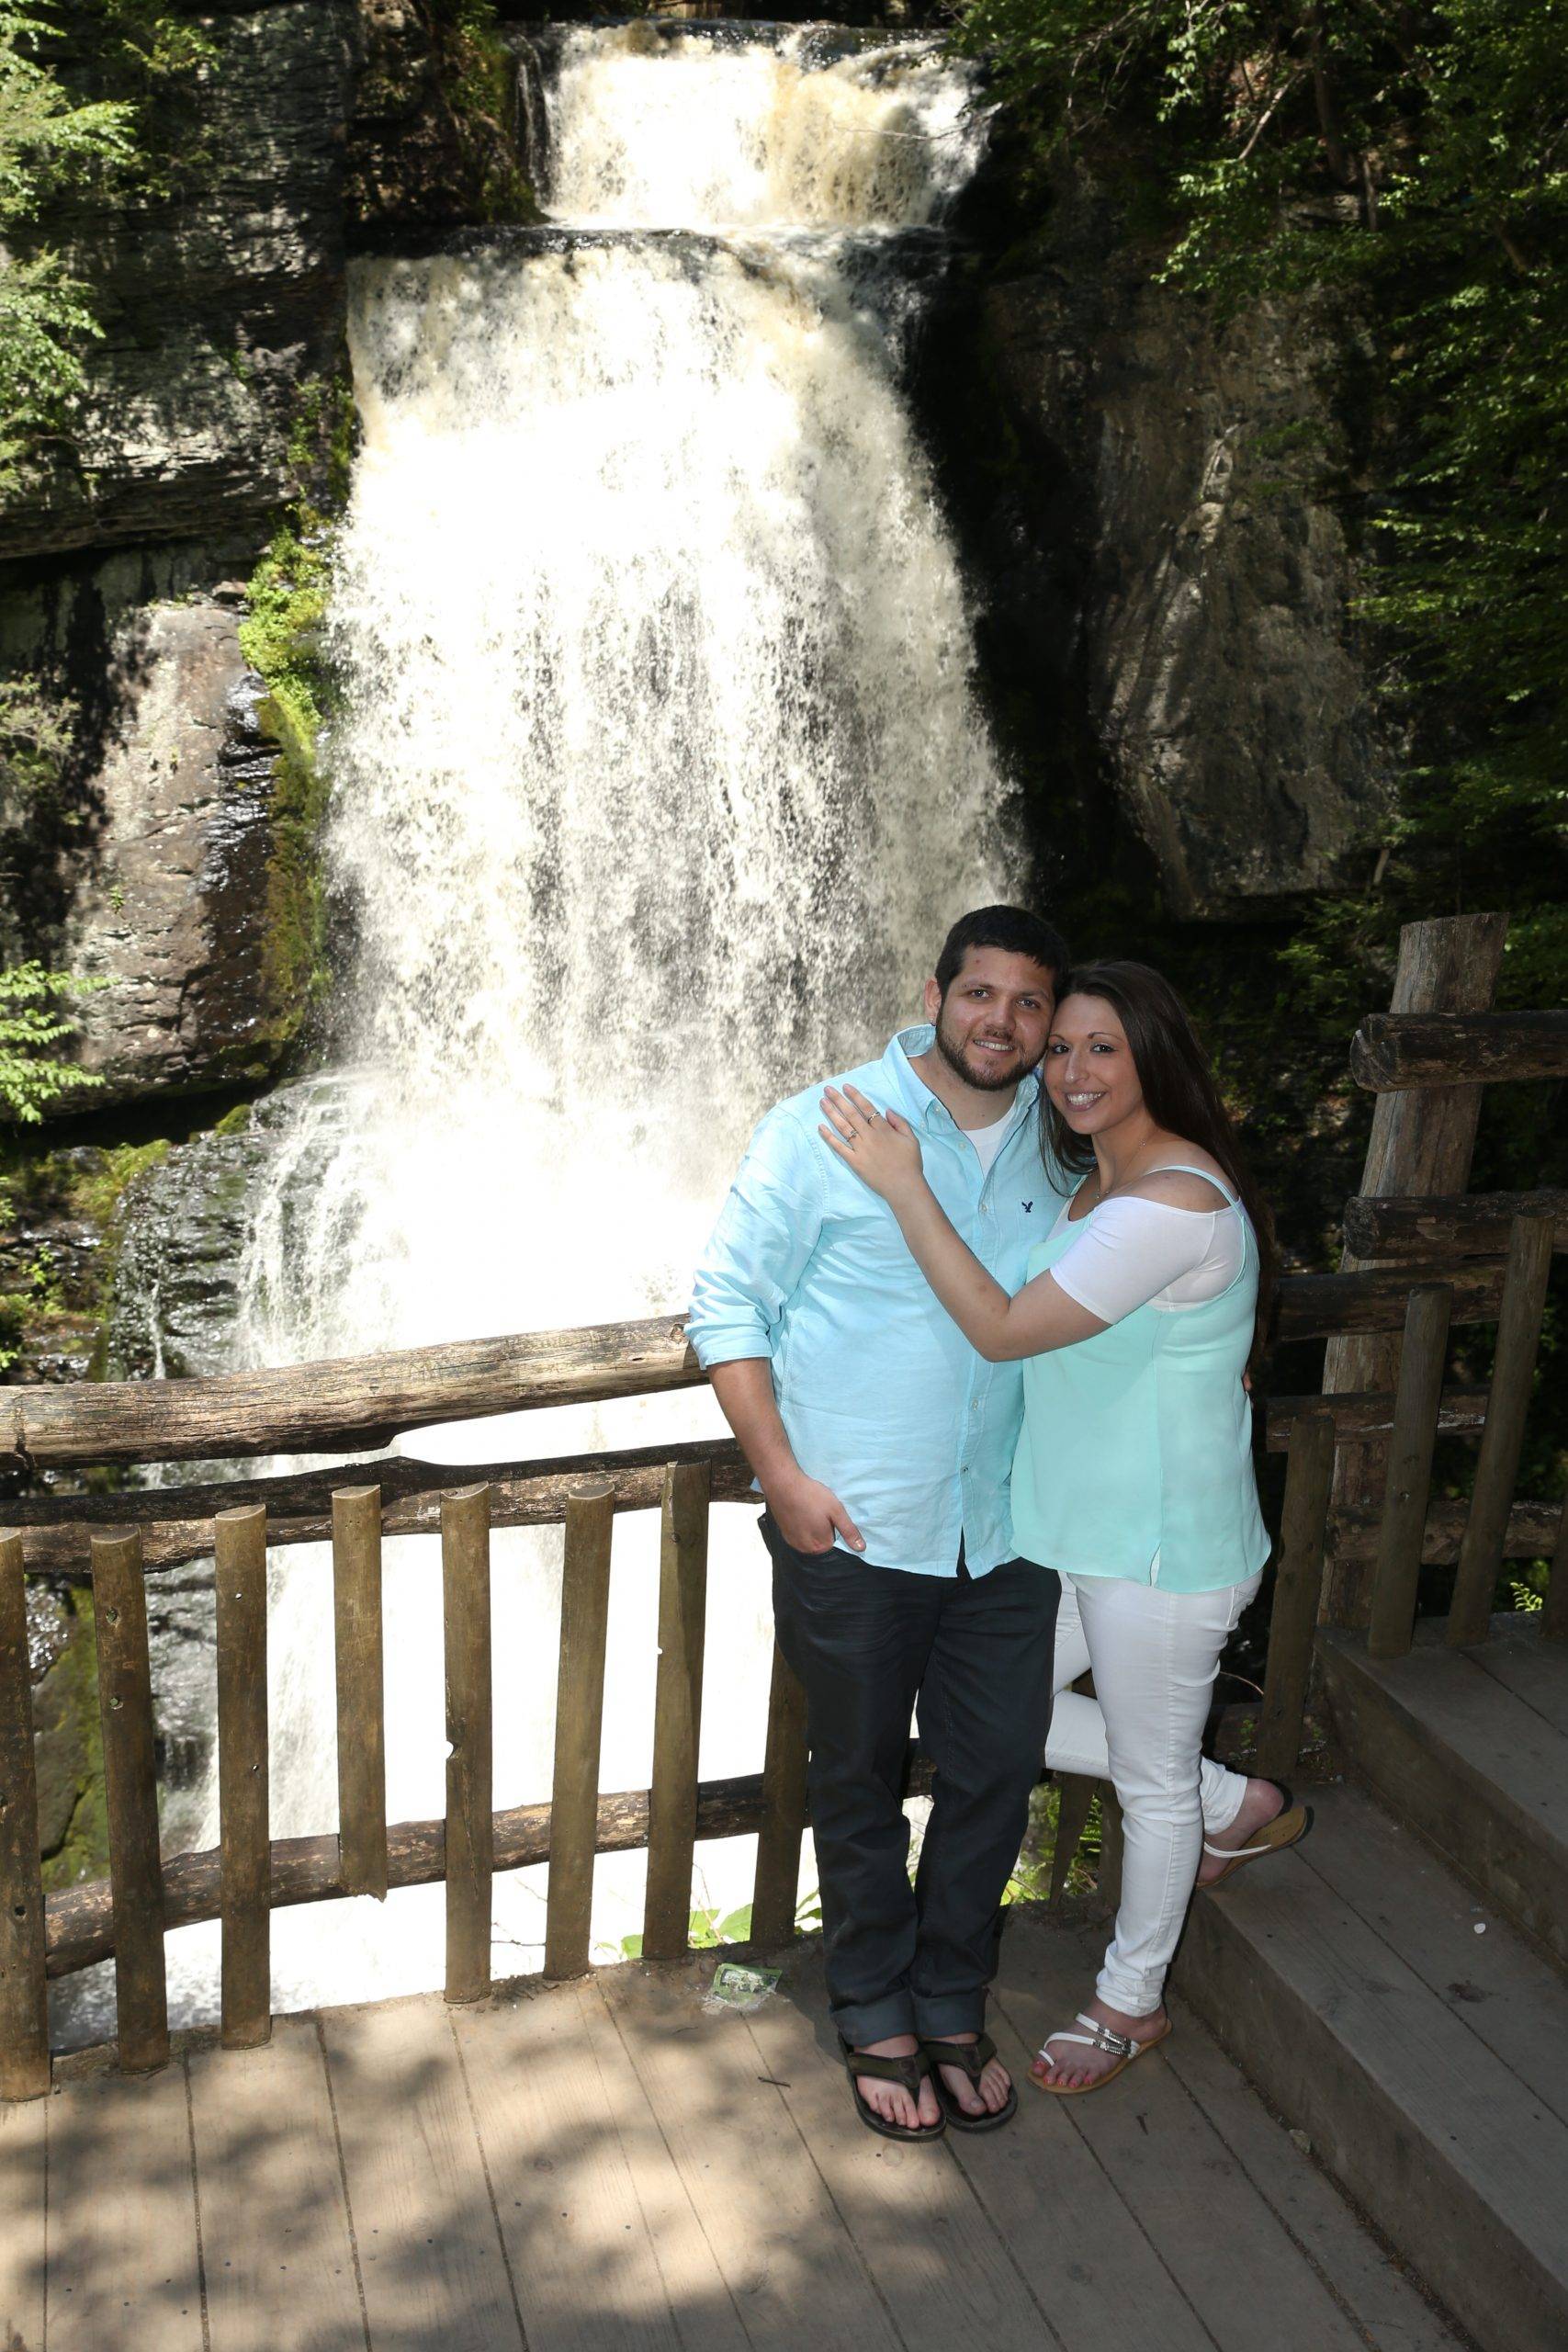 A man and woman standing in front of a waterfall.